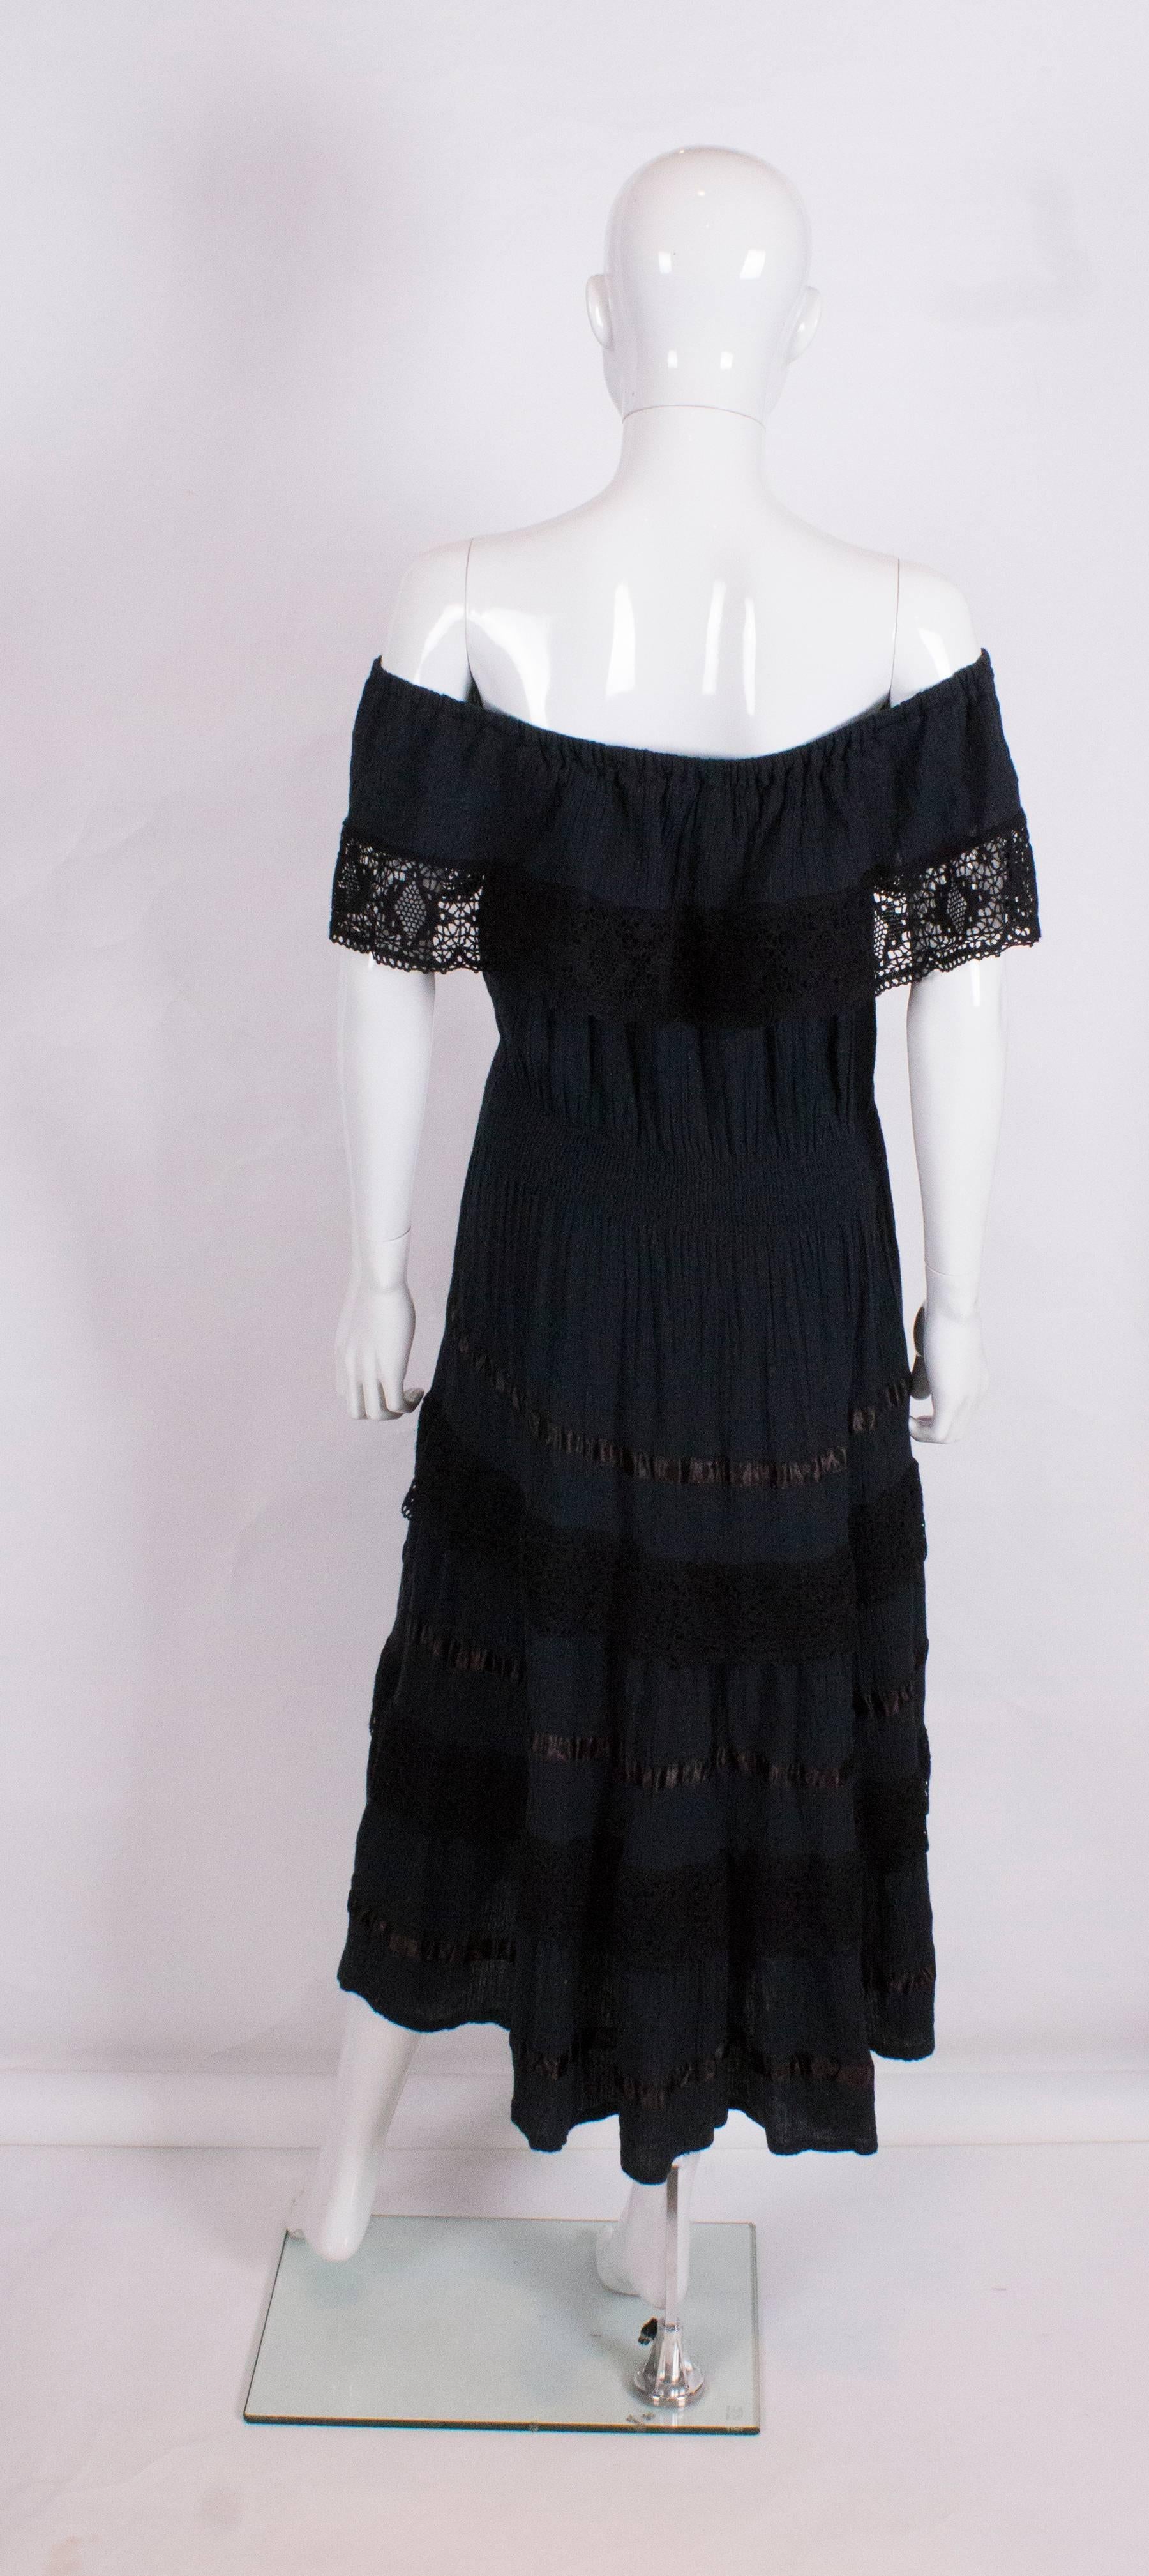 Women's Black On/Off Shoulder Dress with Crochet Border and Ribbon Detail